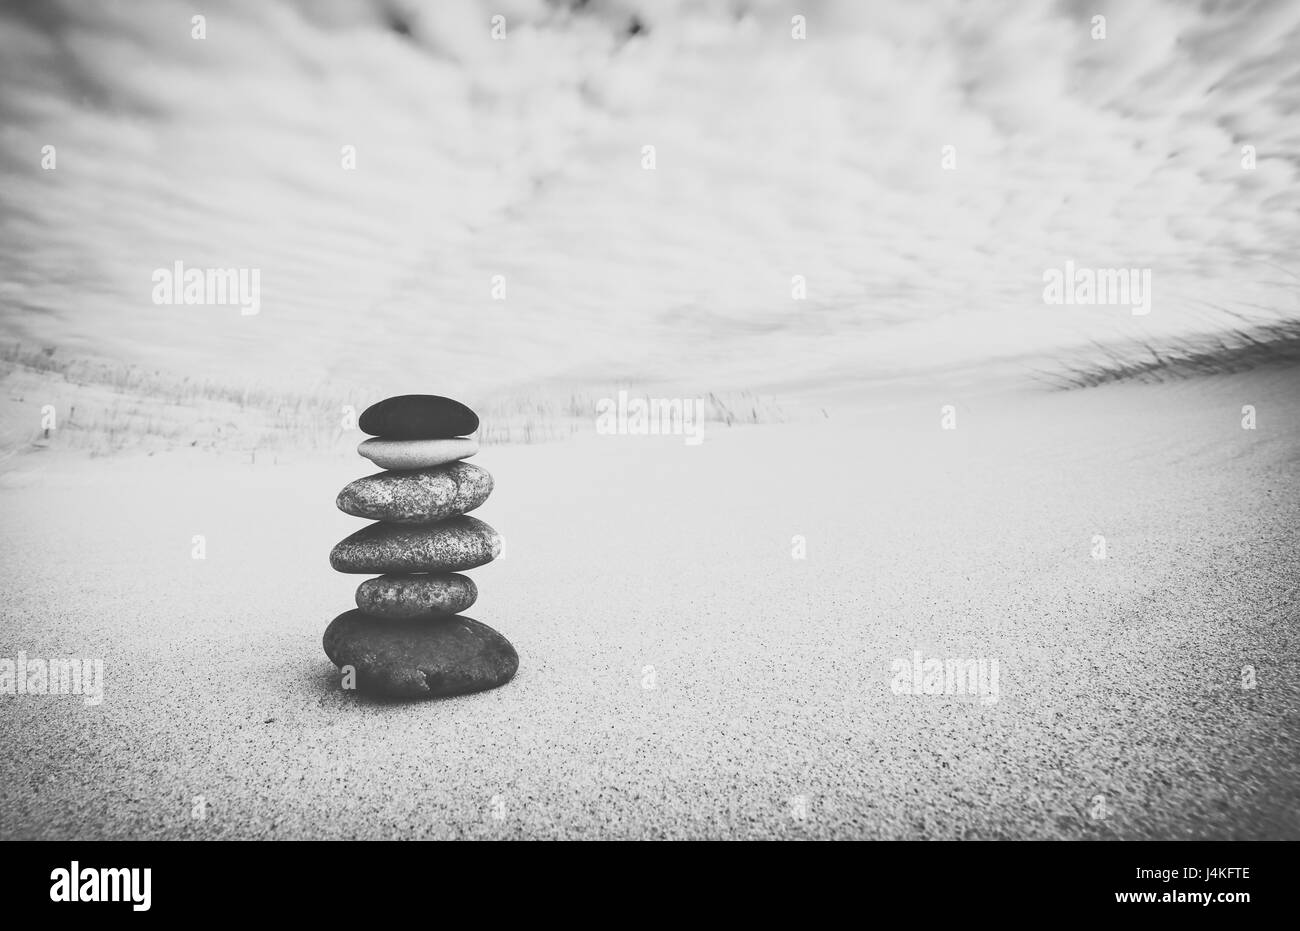 Stack of Balancing Pebbles on Sand Dune, Black and White Edit Stock Photo